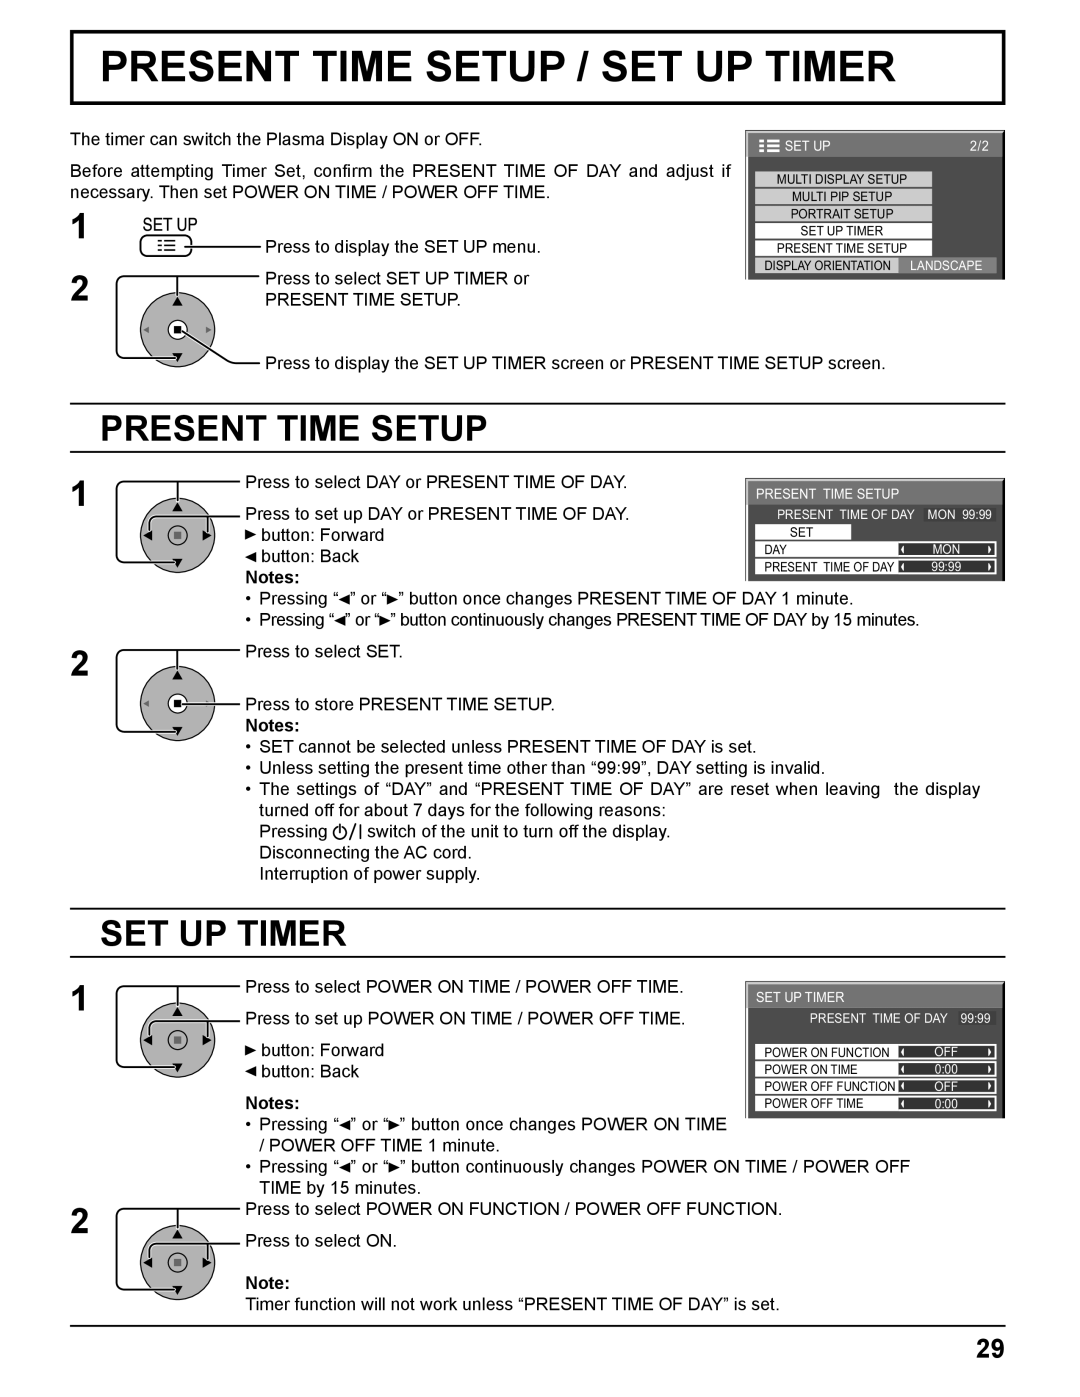 Panasonic TH-58PF11UK Present Time Setup / Set Up Timer, Press to select POWER ON TIME / POWER OFF TIME, button Forward 